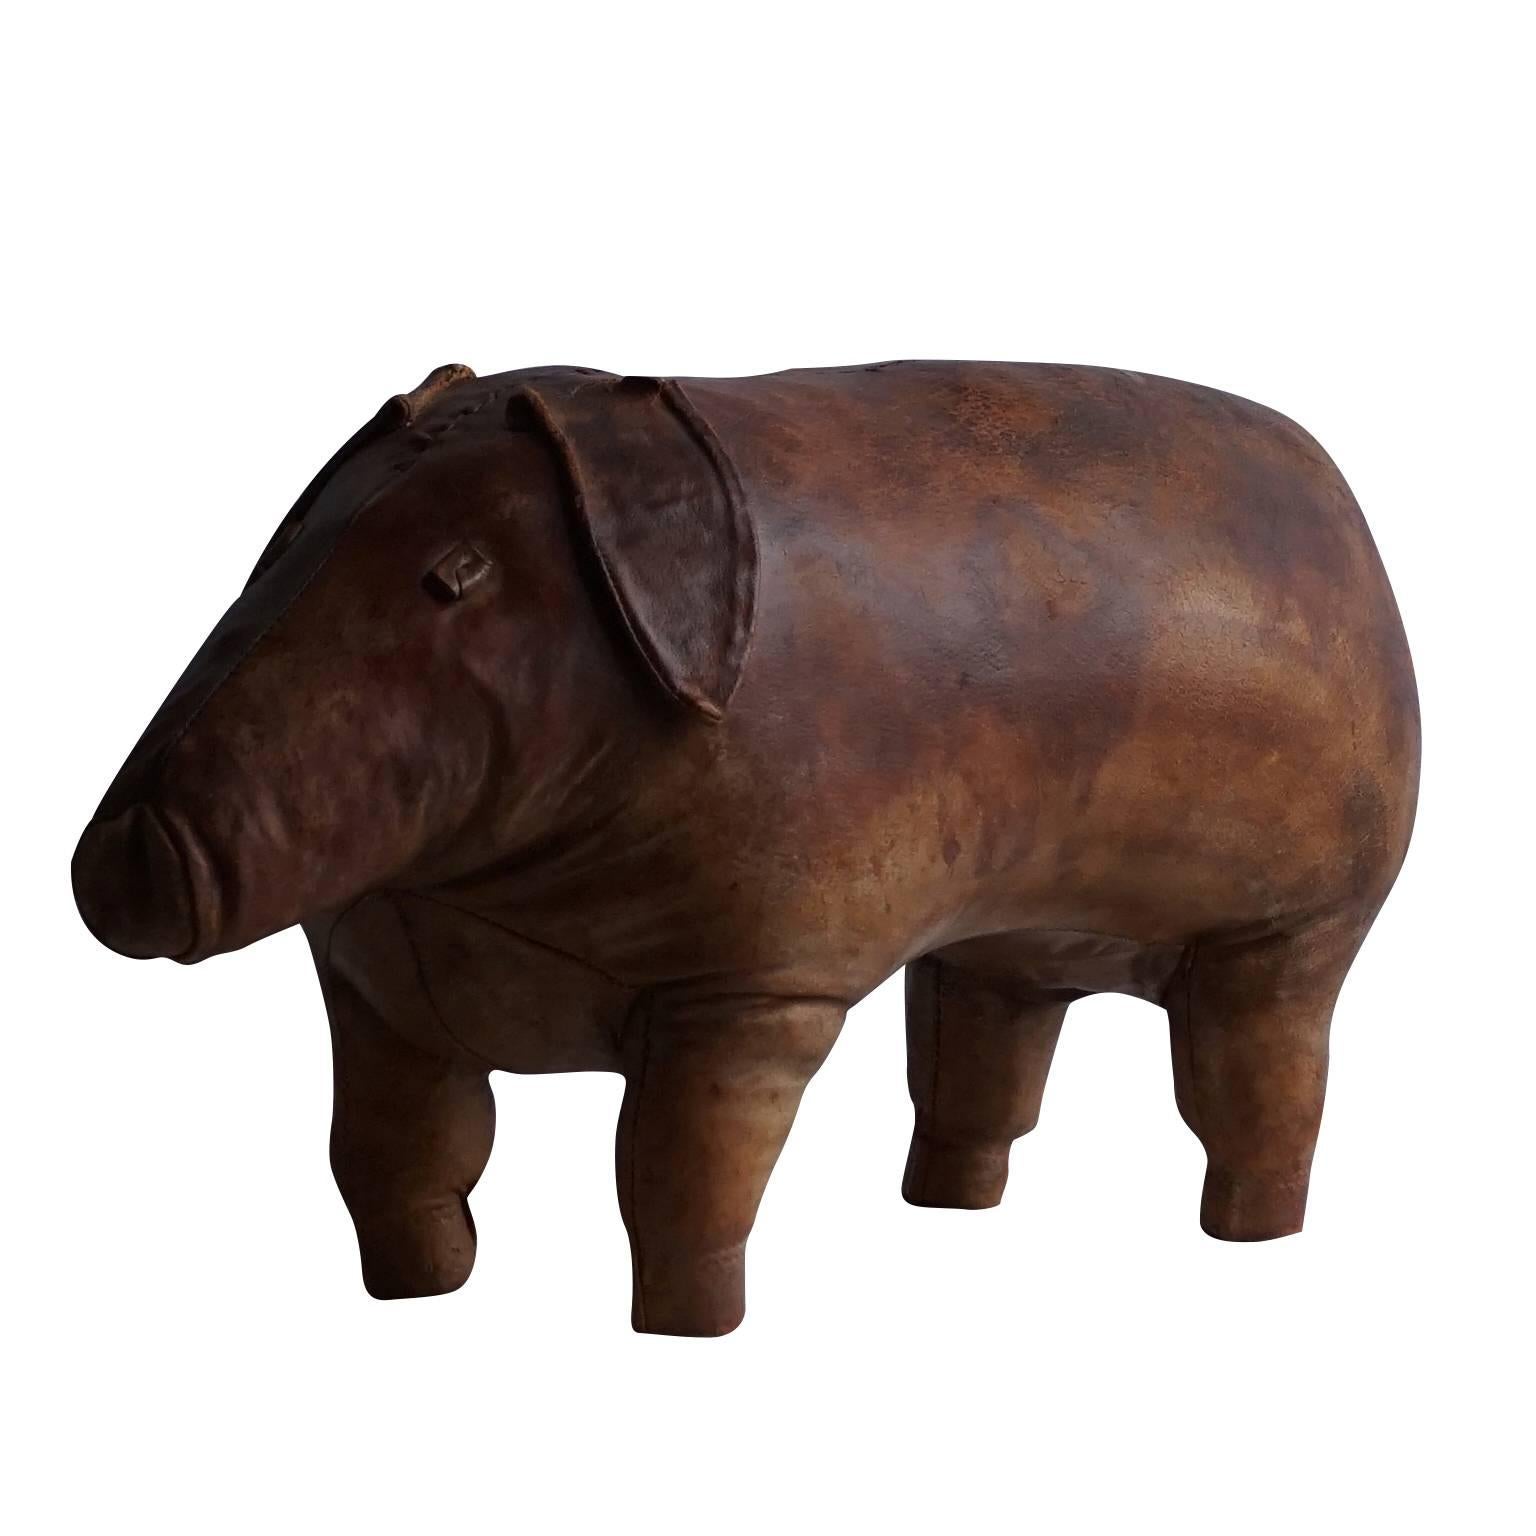 Leather ottoman footrest animal was one of the initial designs of Dimitri Omersa. The design was followed by an elephant, a donkey, a rhino and other animal made in leather, handcrafted, circa 1960.
Measures: H 13” x L 28” x D 10”.